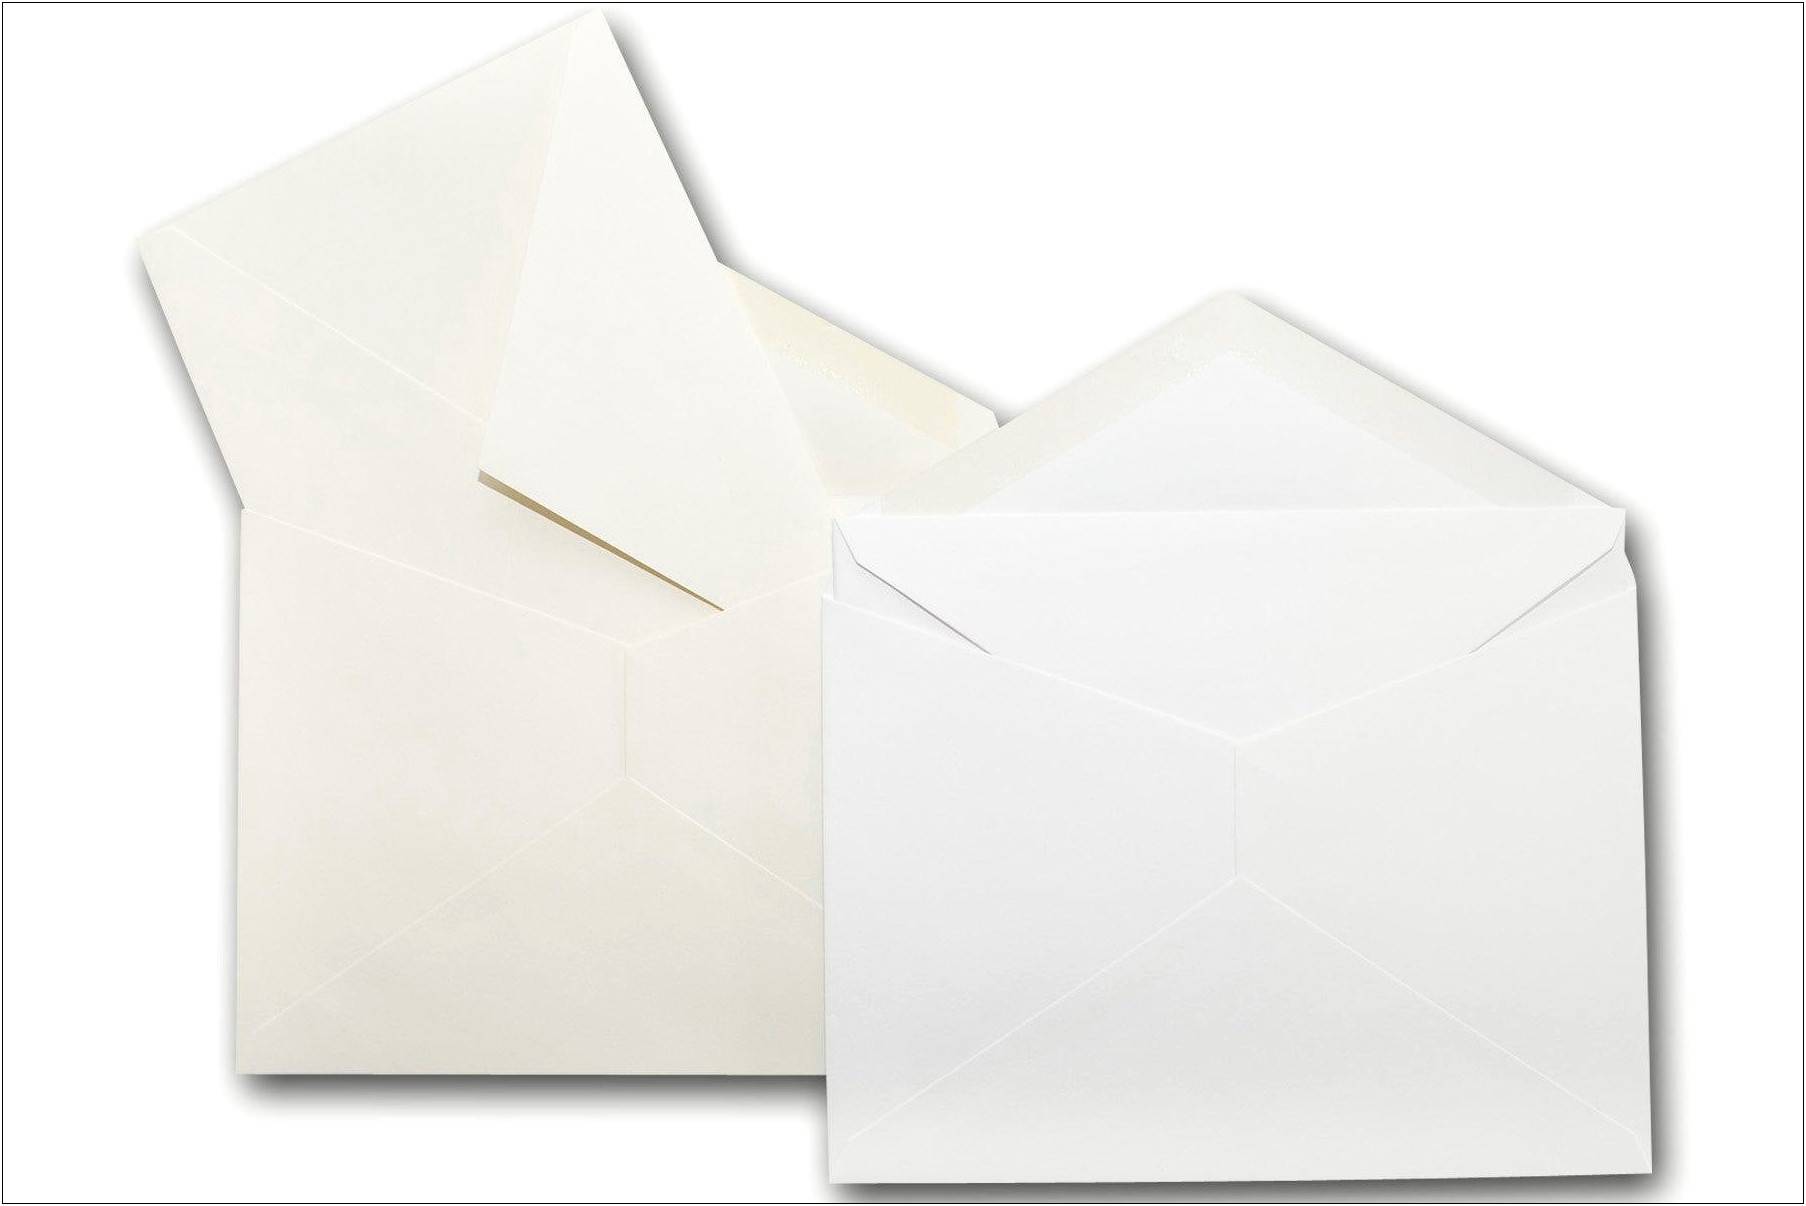 5 By 7 Envelopes For Wedding Invitations